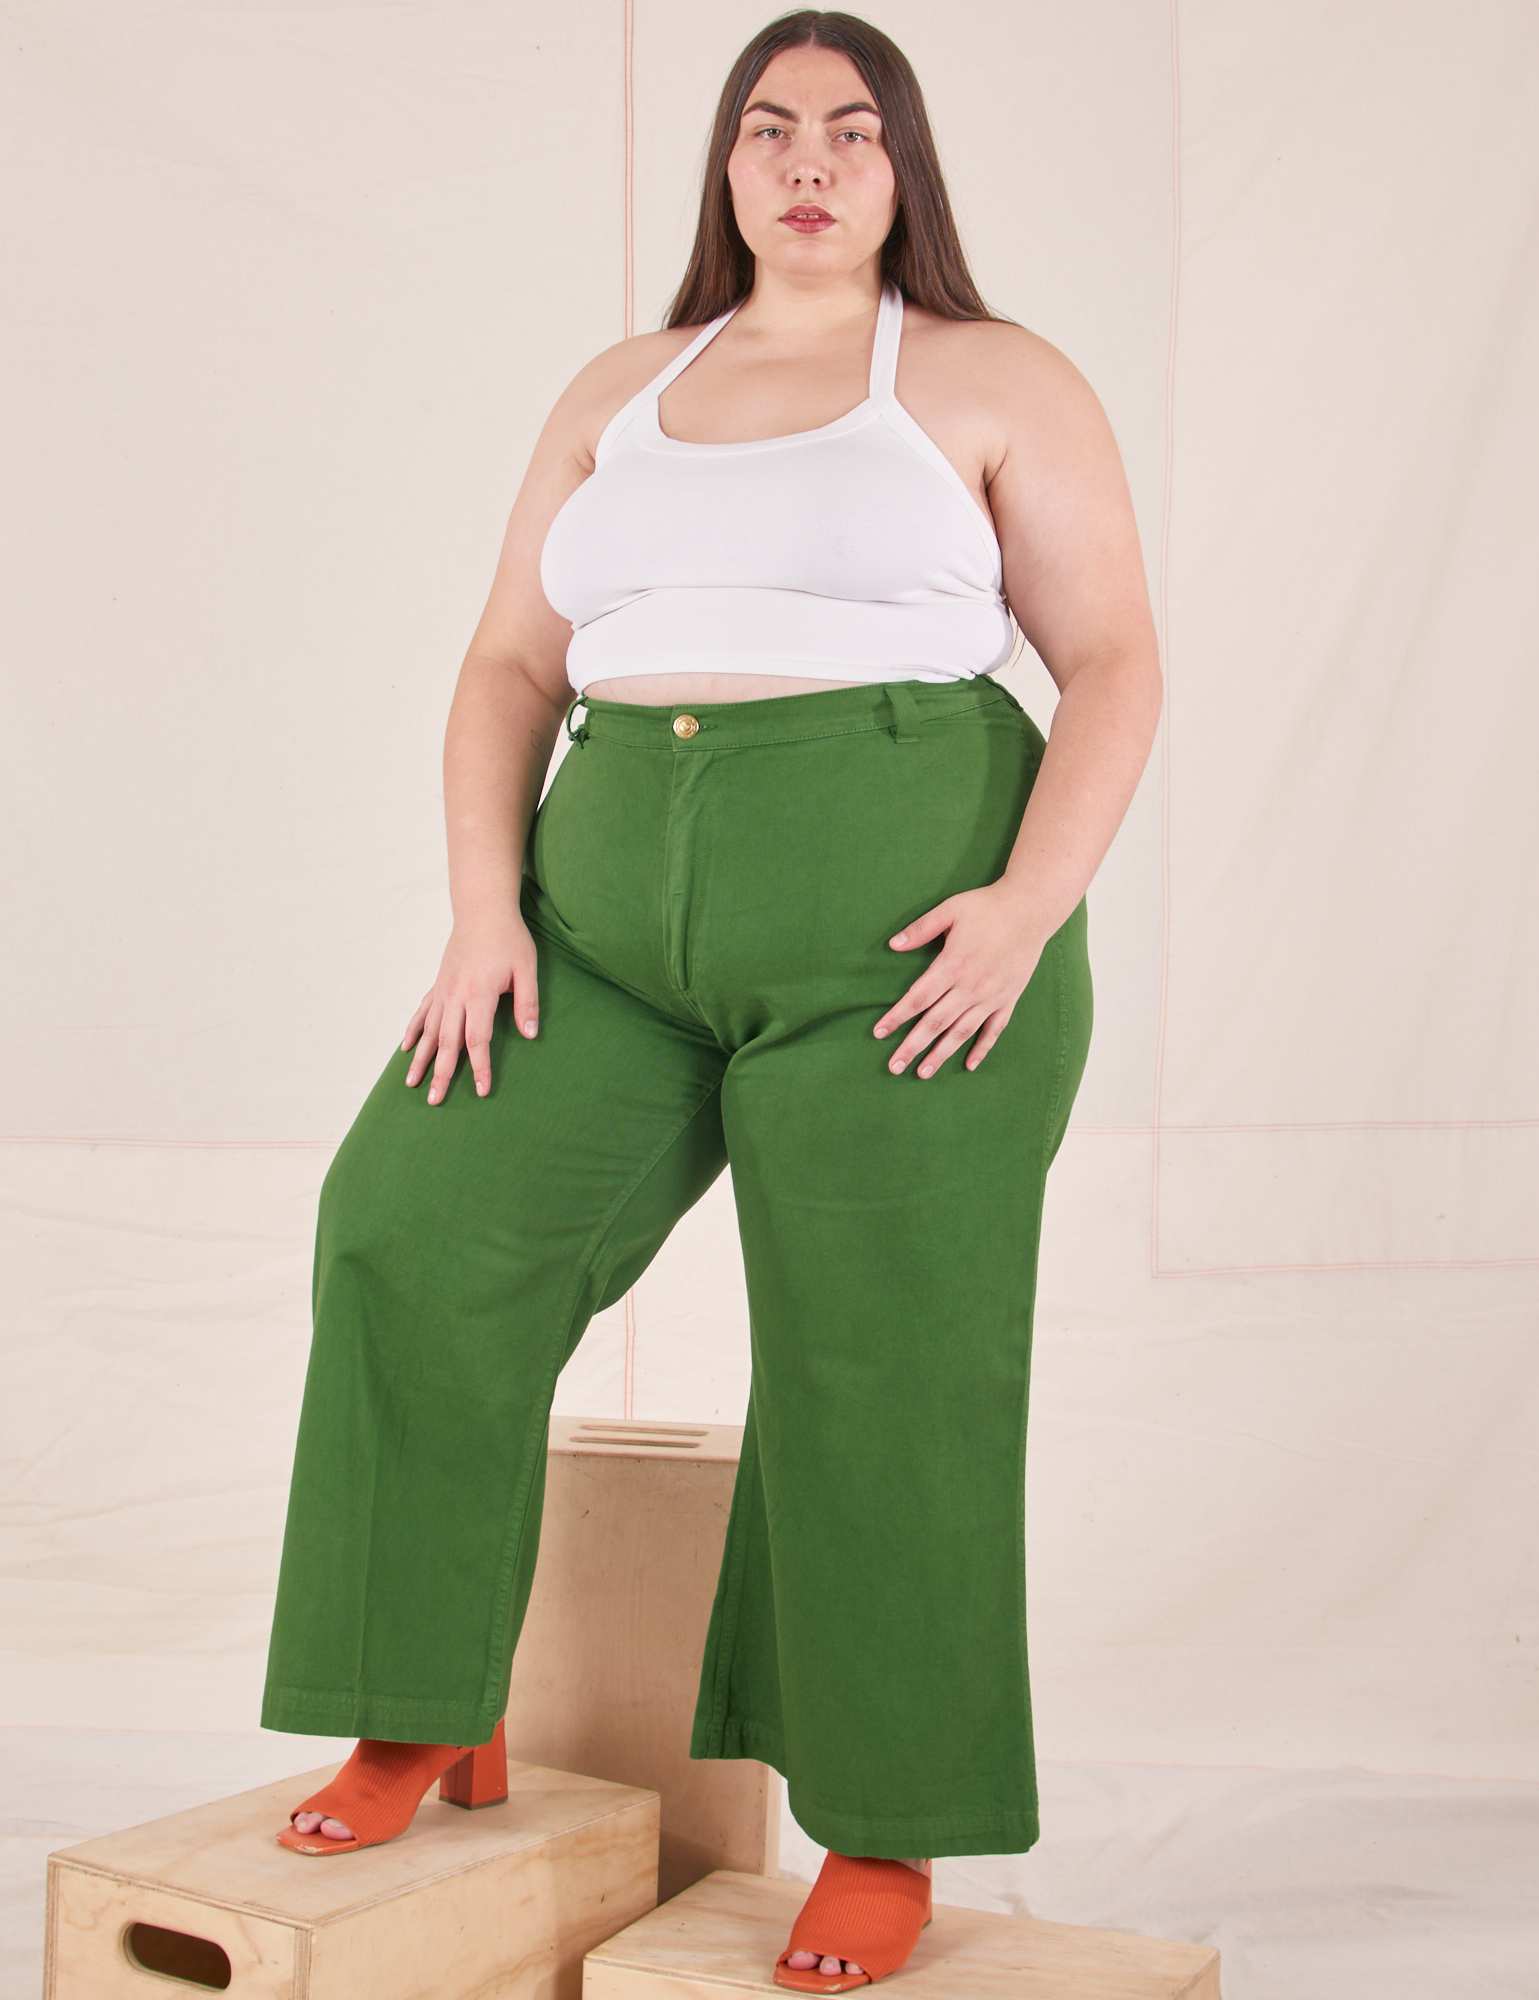 Marielena is 5&#39;8&quot; and wearing 2XL Bell Bottoms in Lawn Green paired with vintage off-white Halter Top